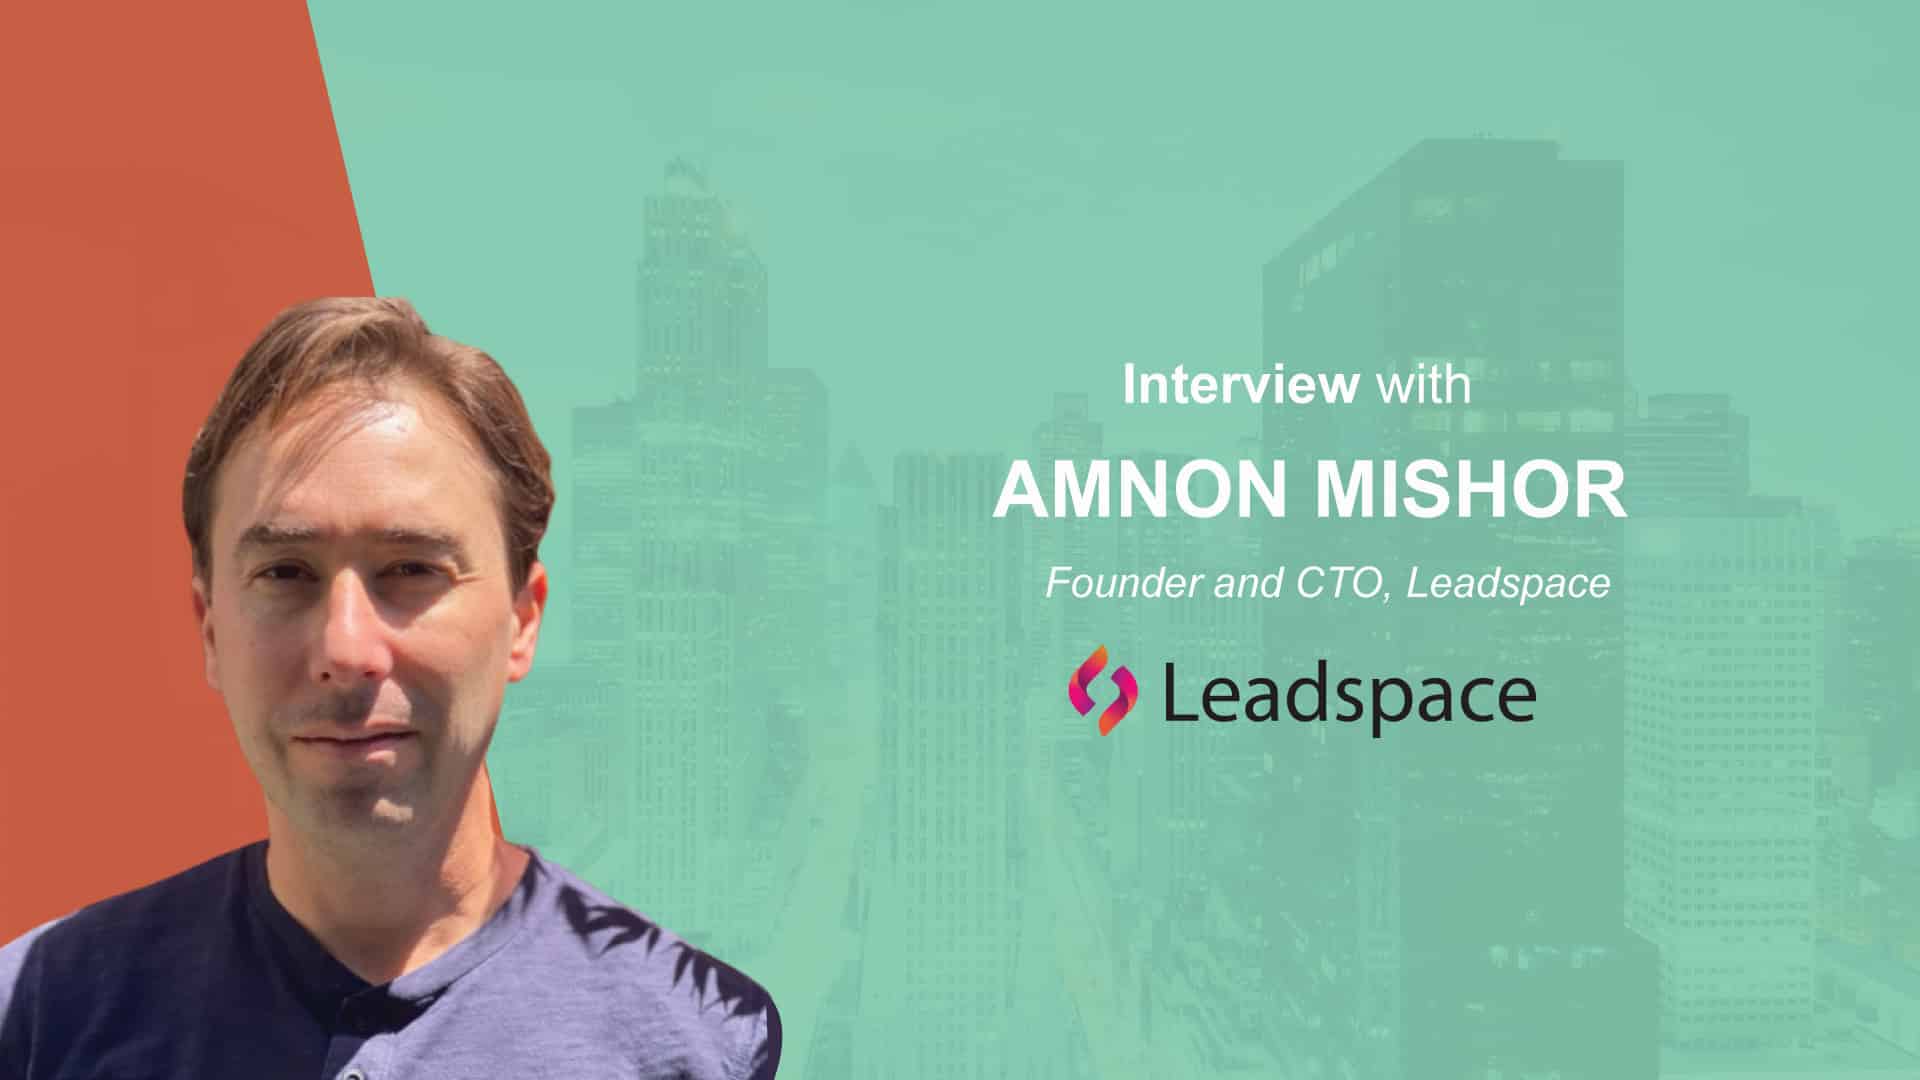 Martech Interview with Amnon Mishor, Founder and CTO, Leadspace